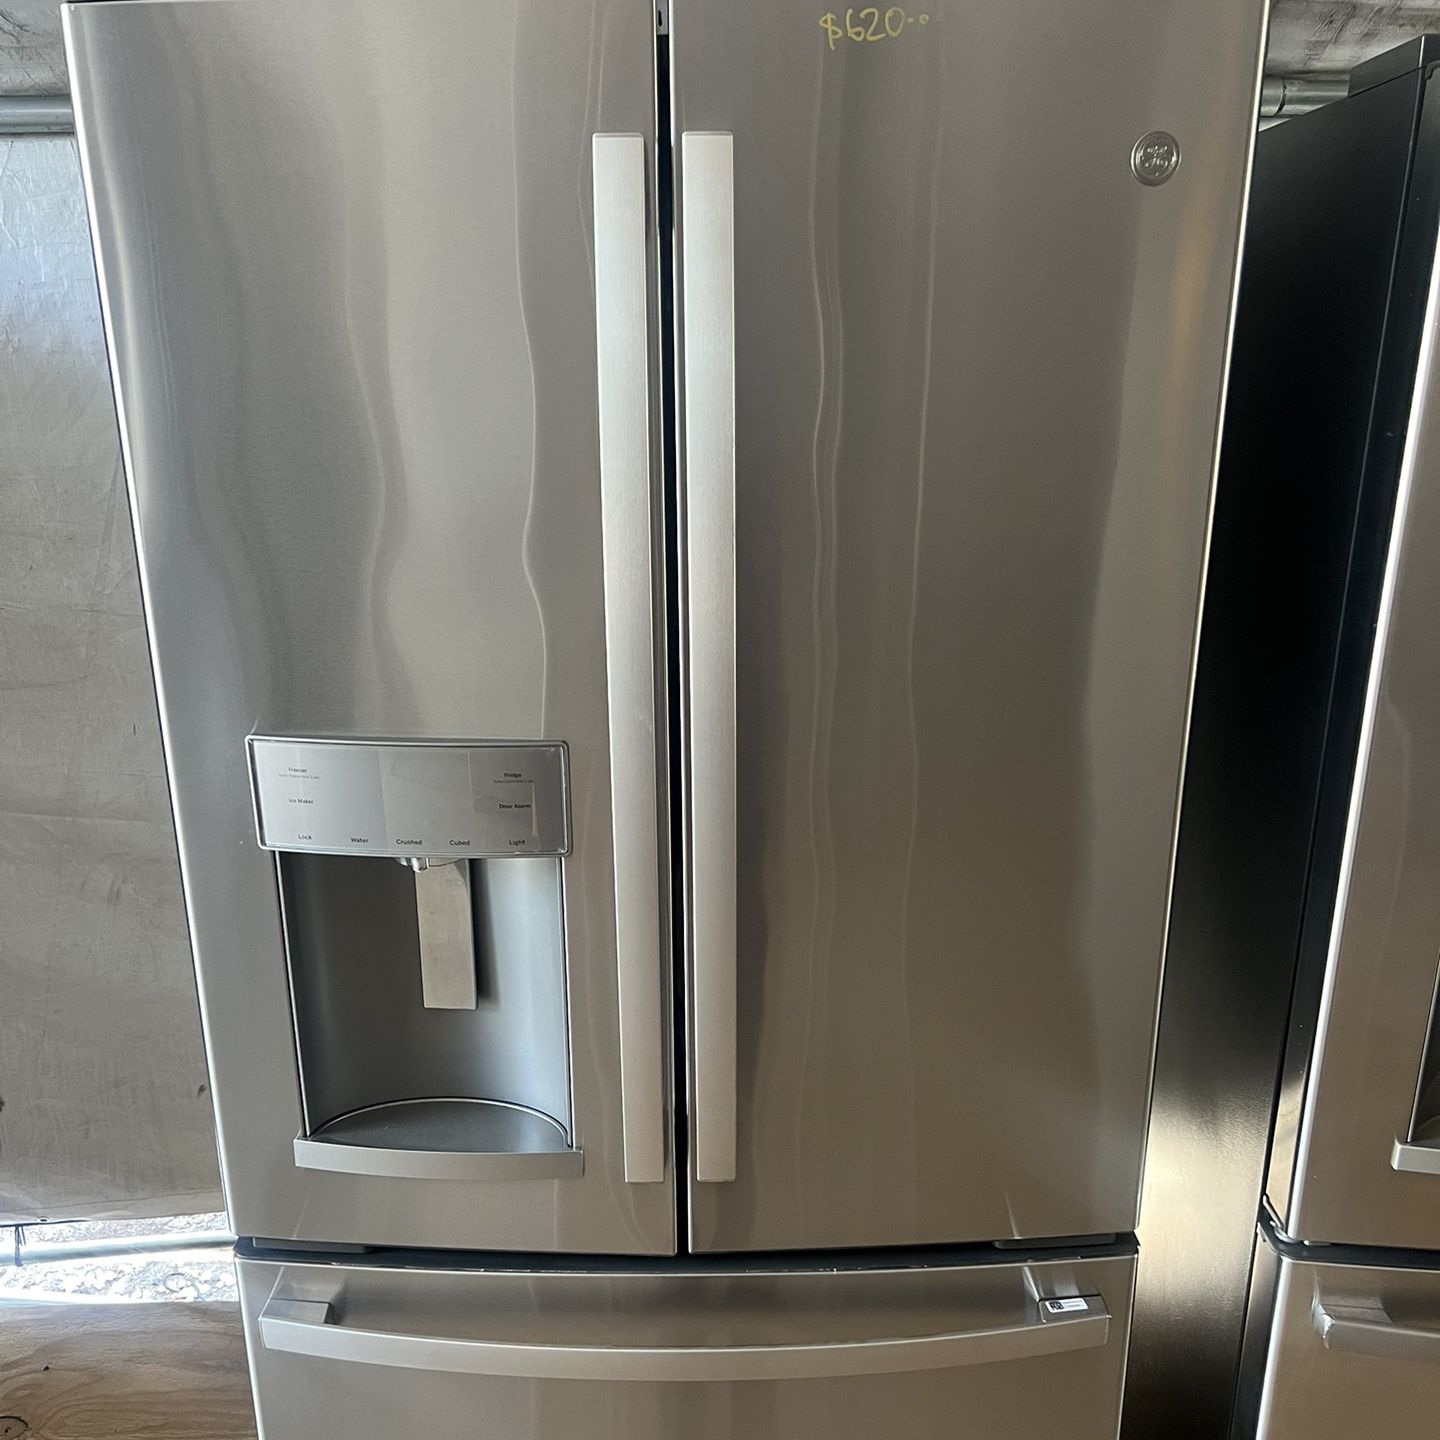 Ge French Door Refrigerator   60 day warranty/ Located at:📍5415 Carmack Rd Tampa Fl 33610📍 